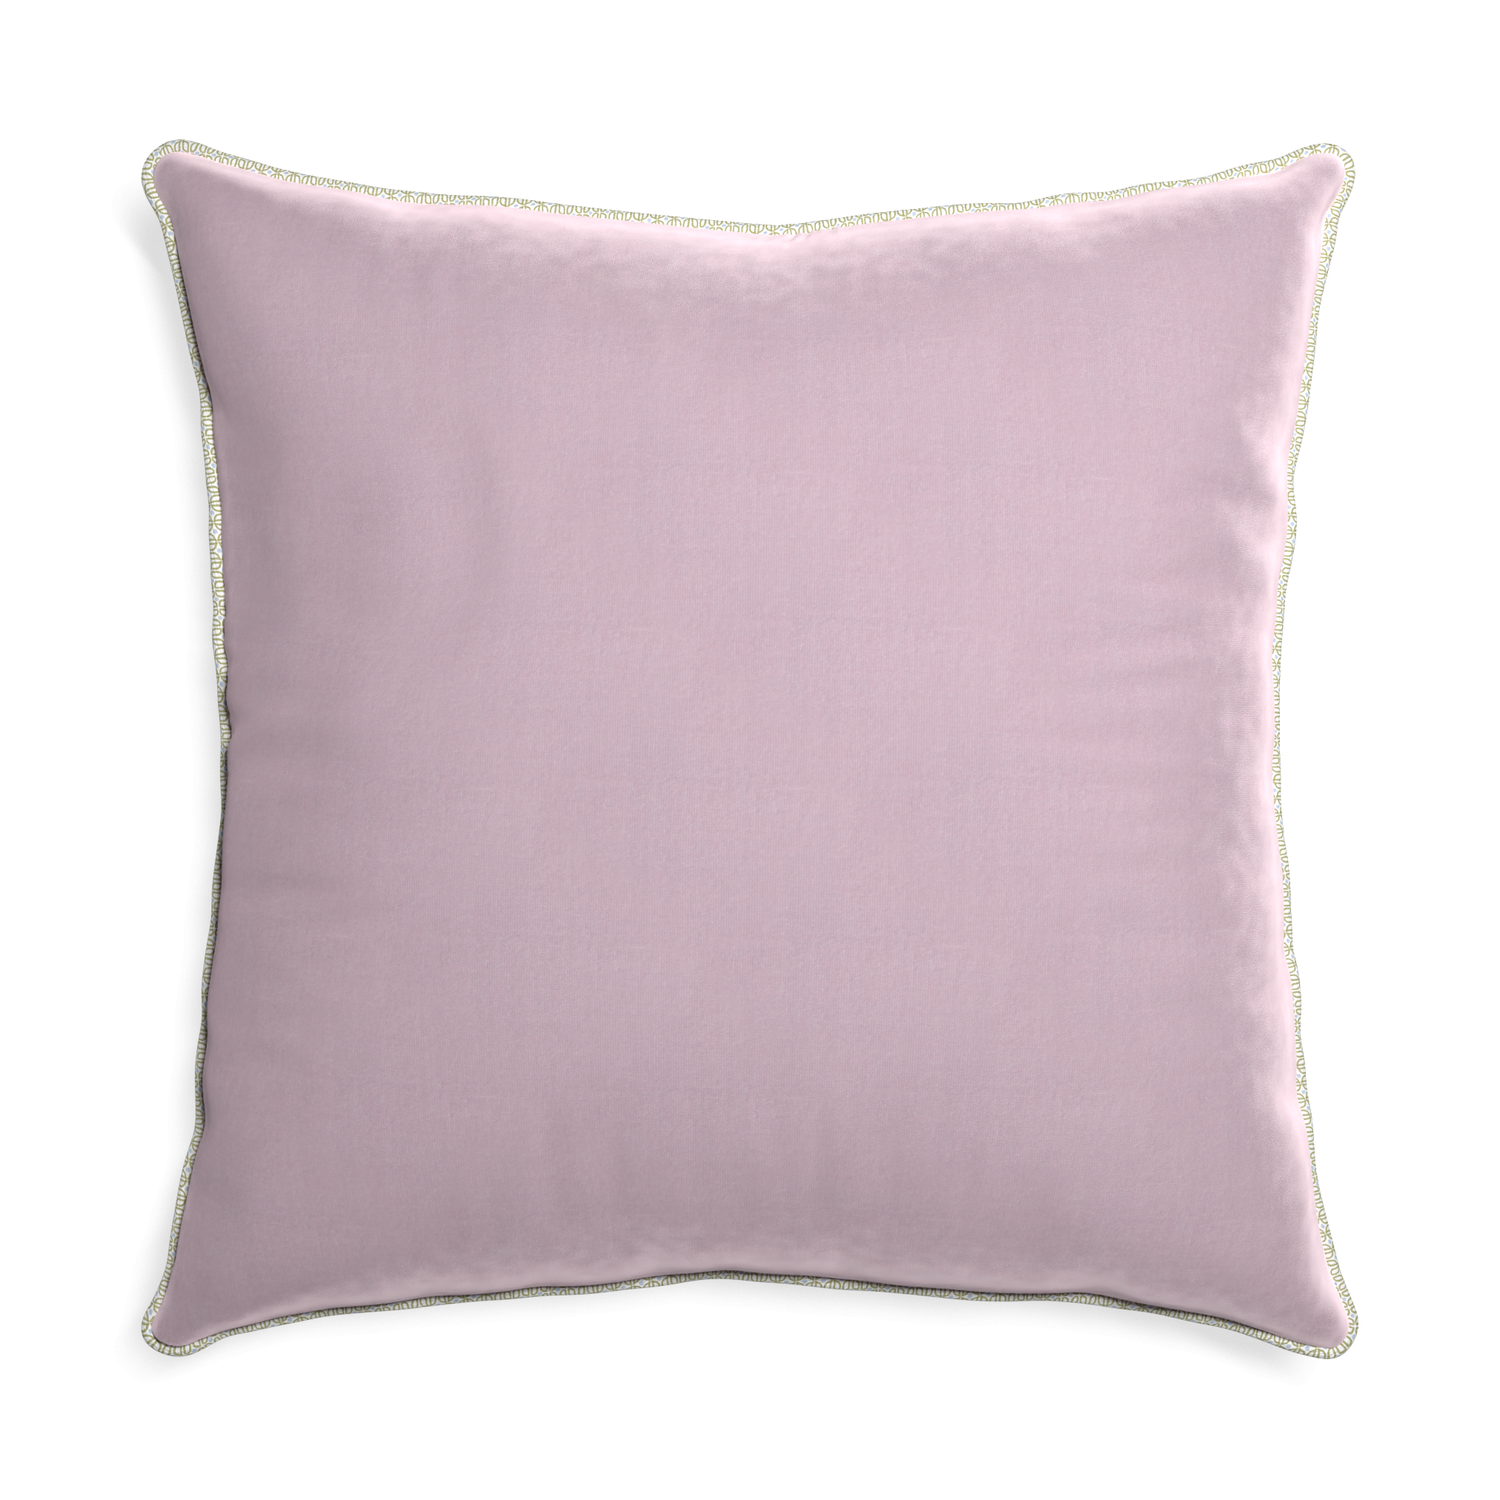 Euro-sham lilac velvet custom lilacpillow with l piping on white background